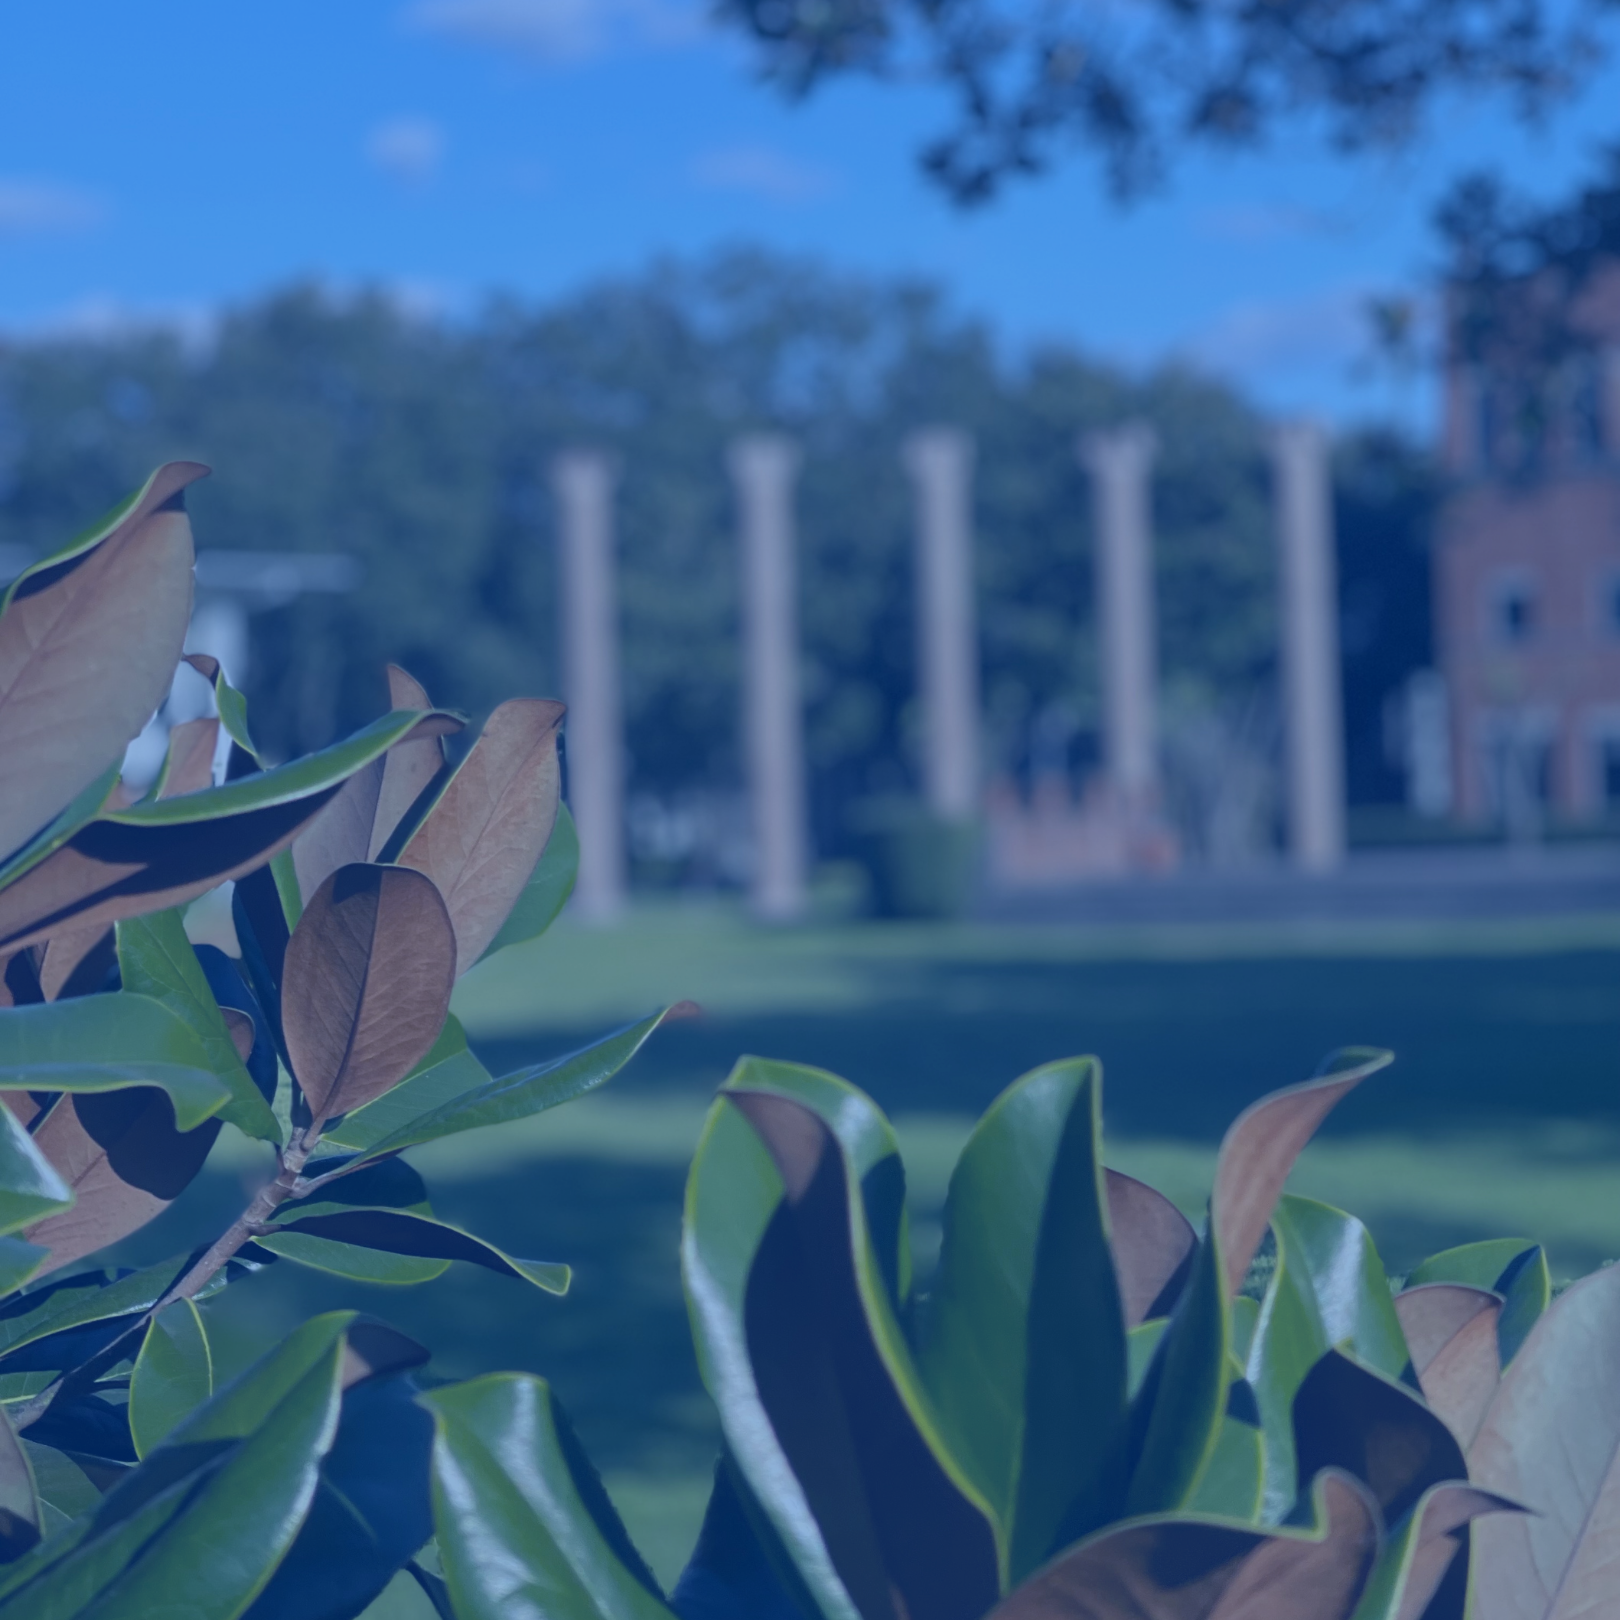 Grow - Learn about HBU, Traditions and MORE!